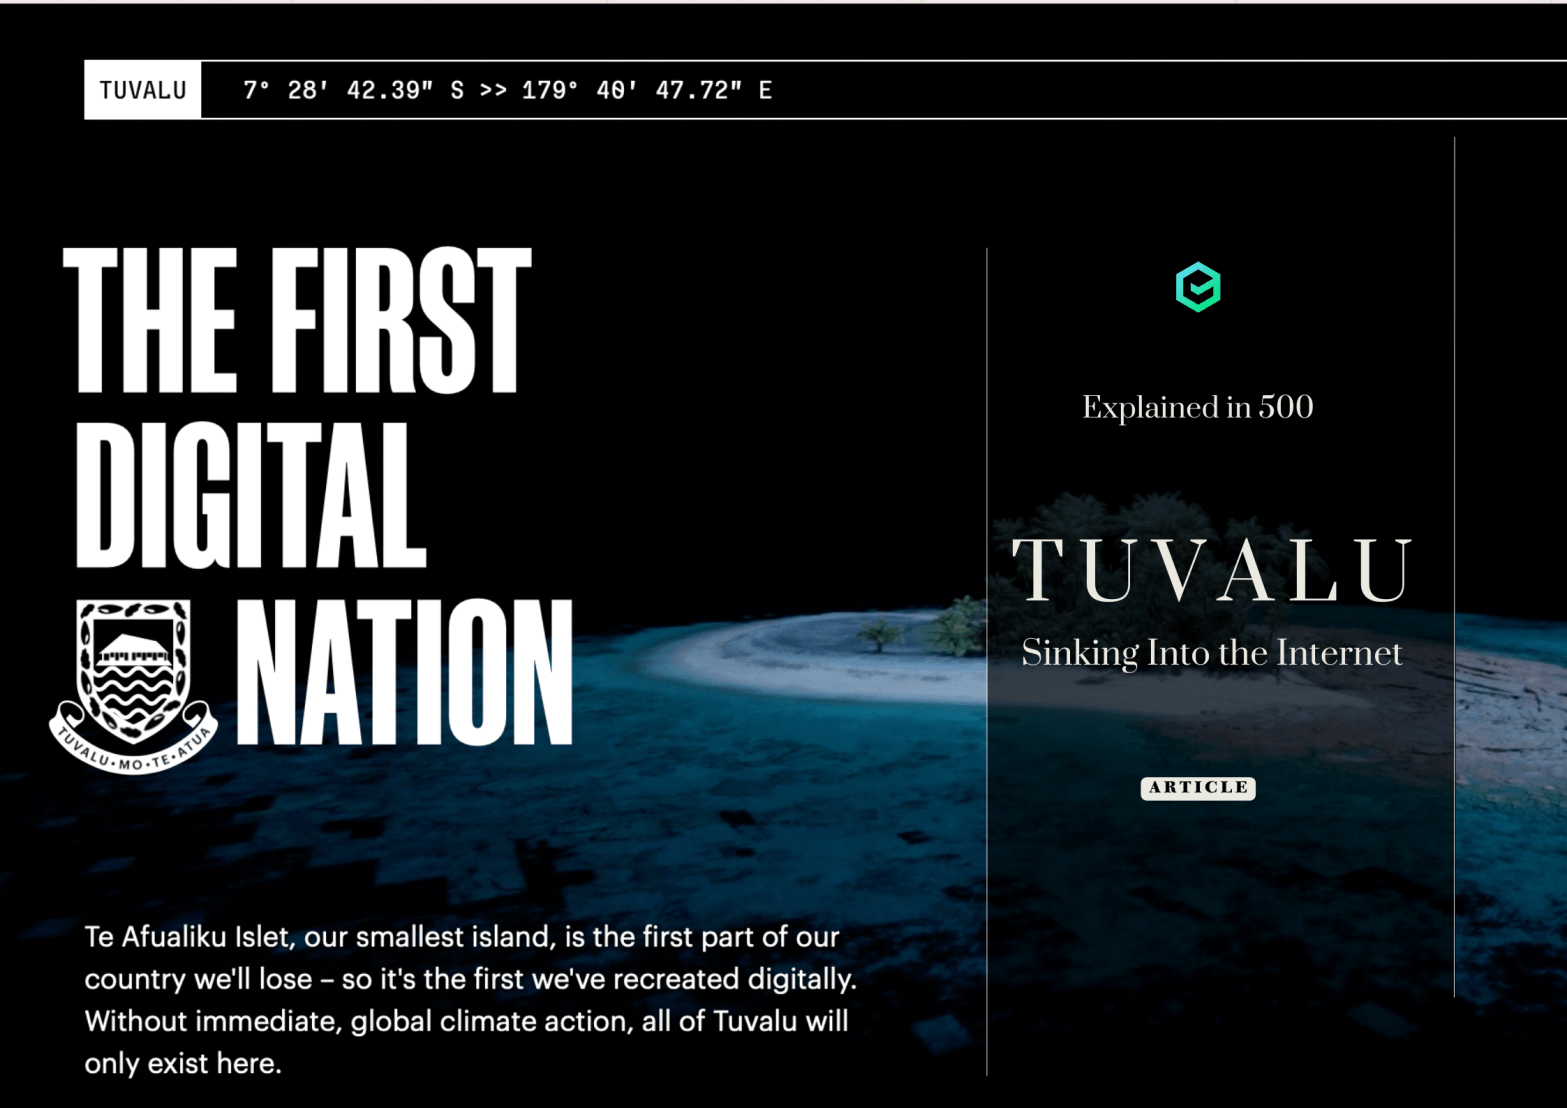 Explained In 500:  Tuvalu, Sinking Into the Internet